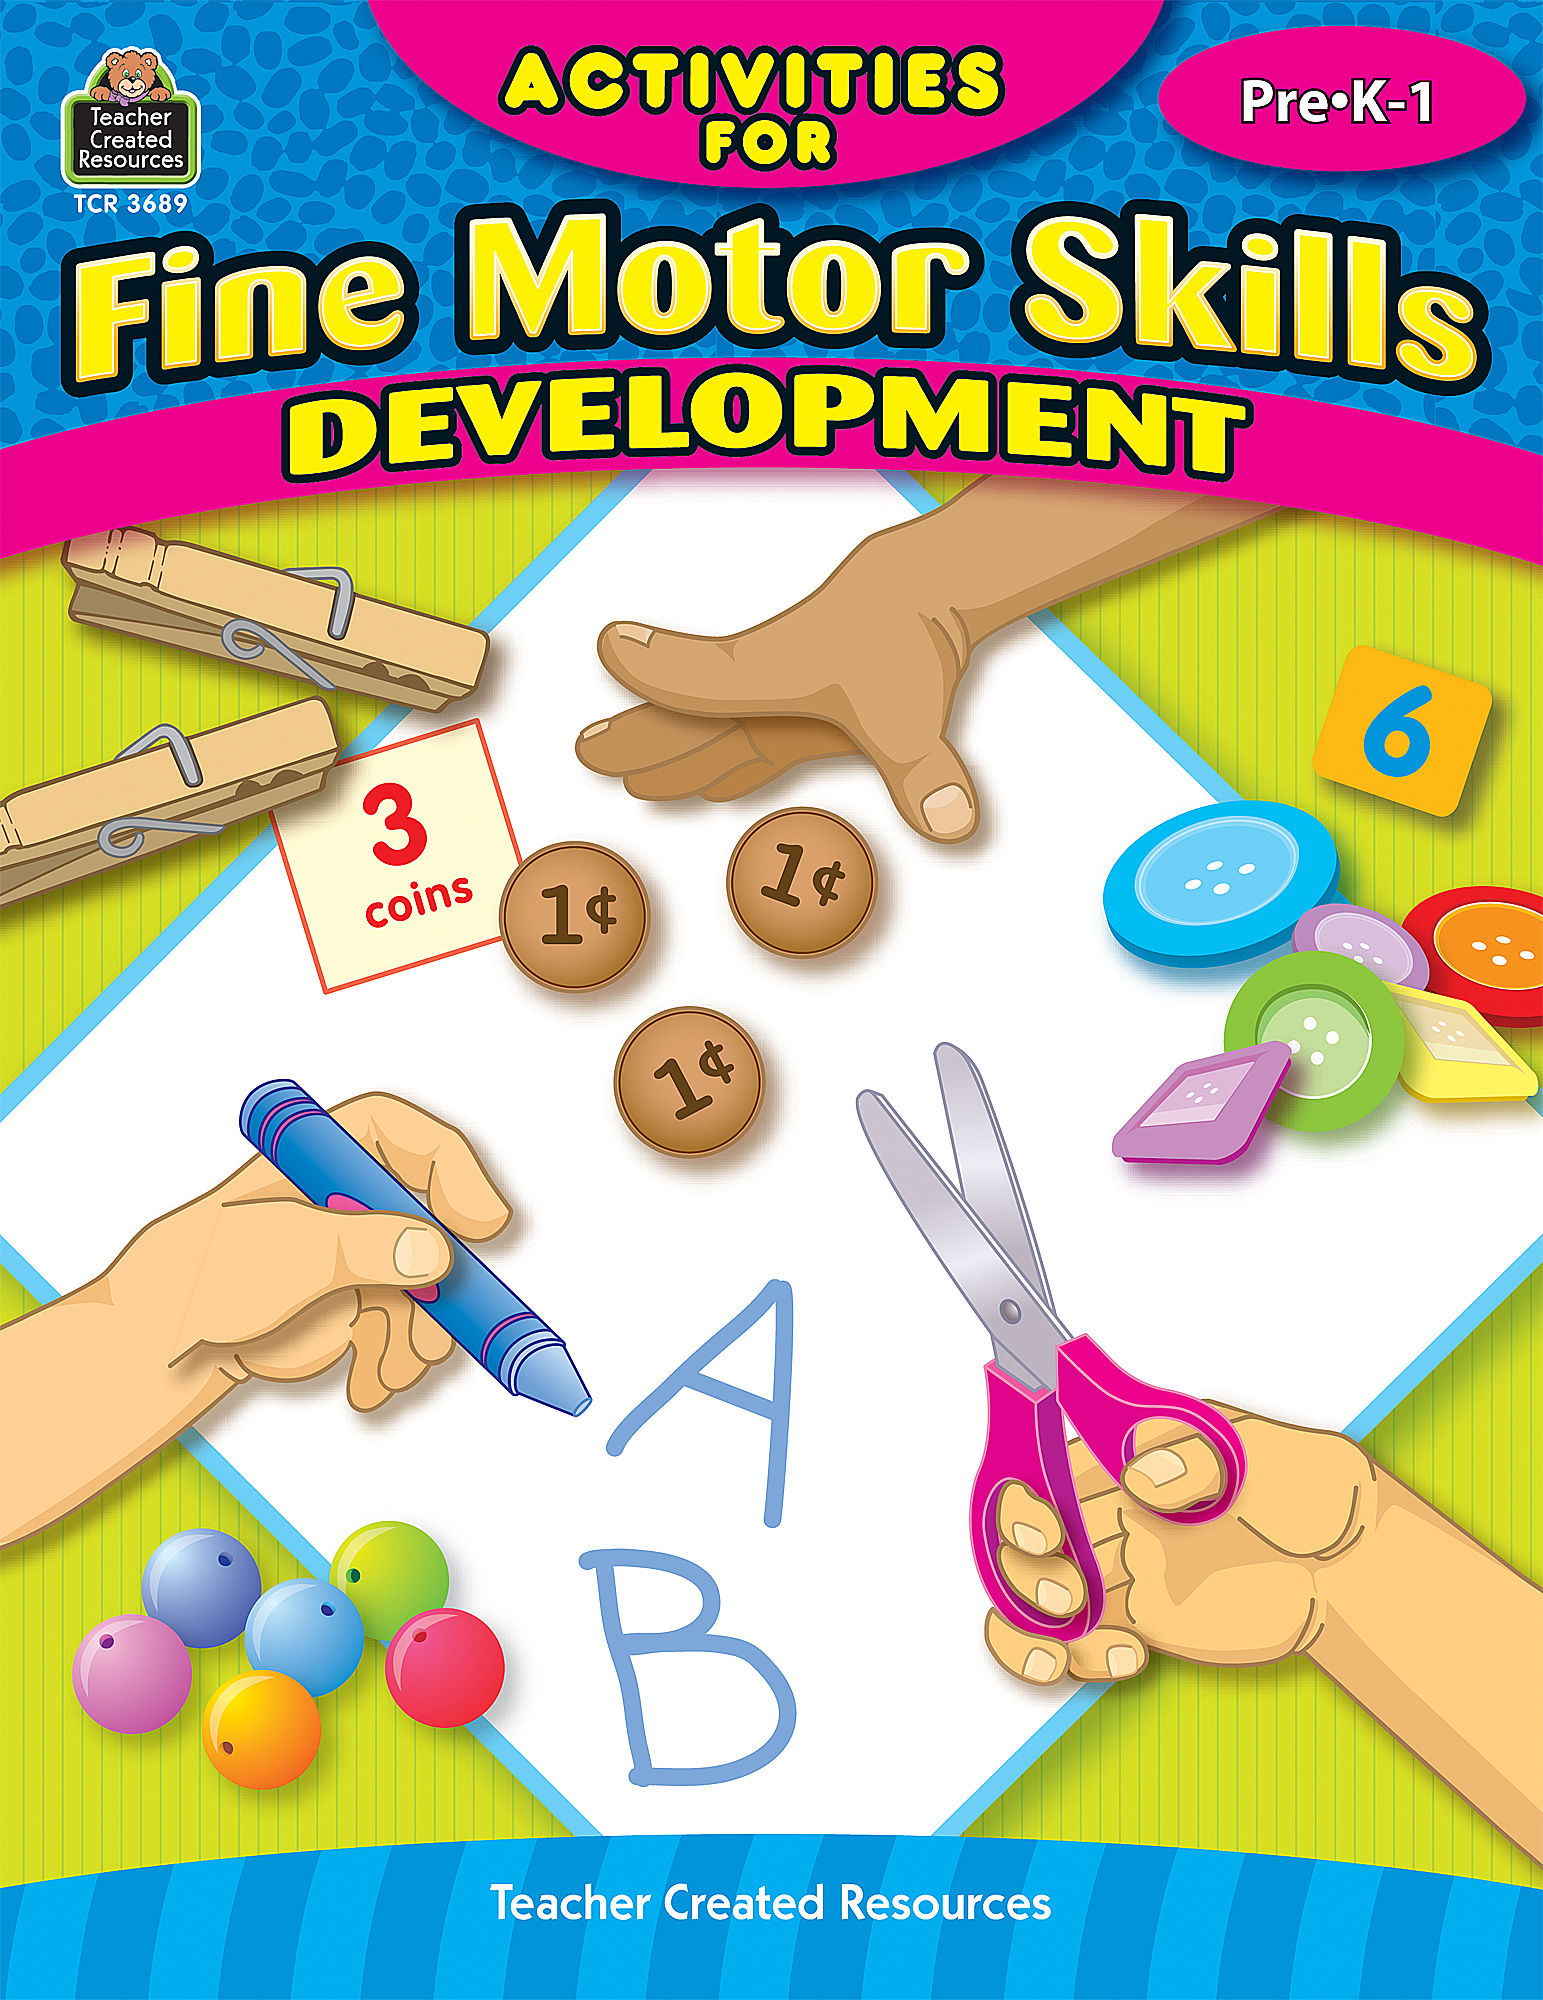 what are the fine motor skills activities for preschoolers